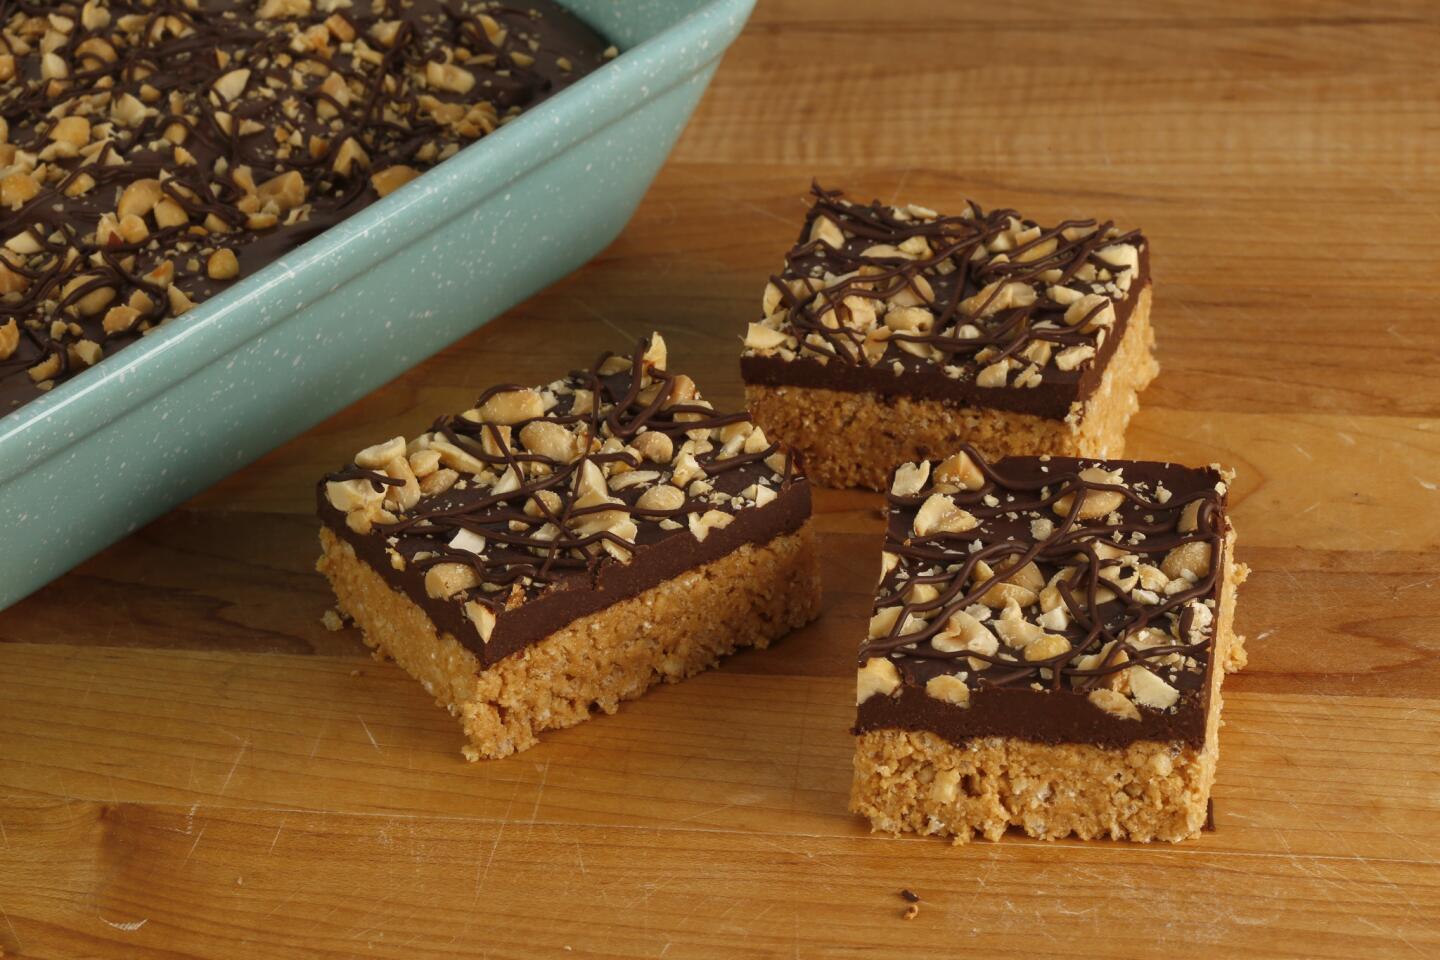 Follow these simple steps to for your own no-bake peanut butter bars: